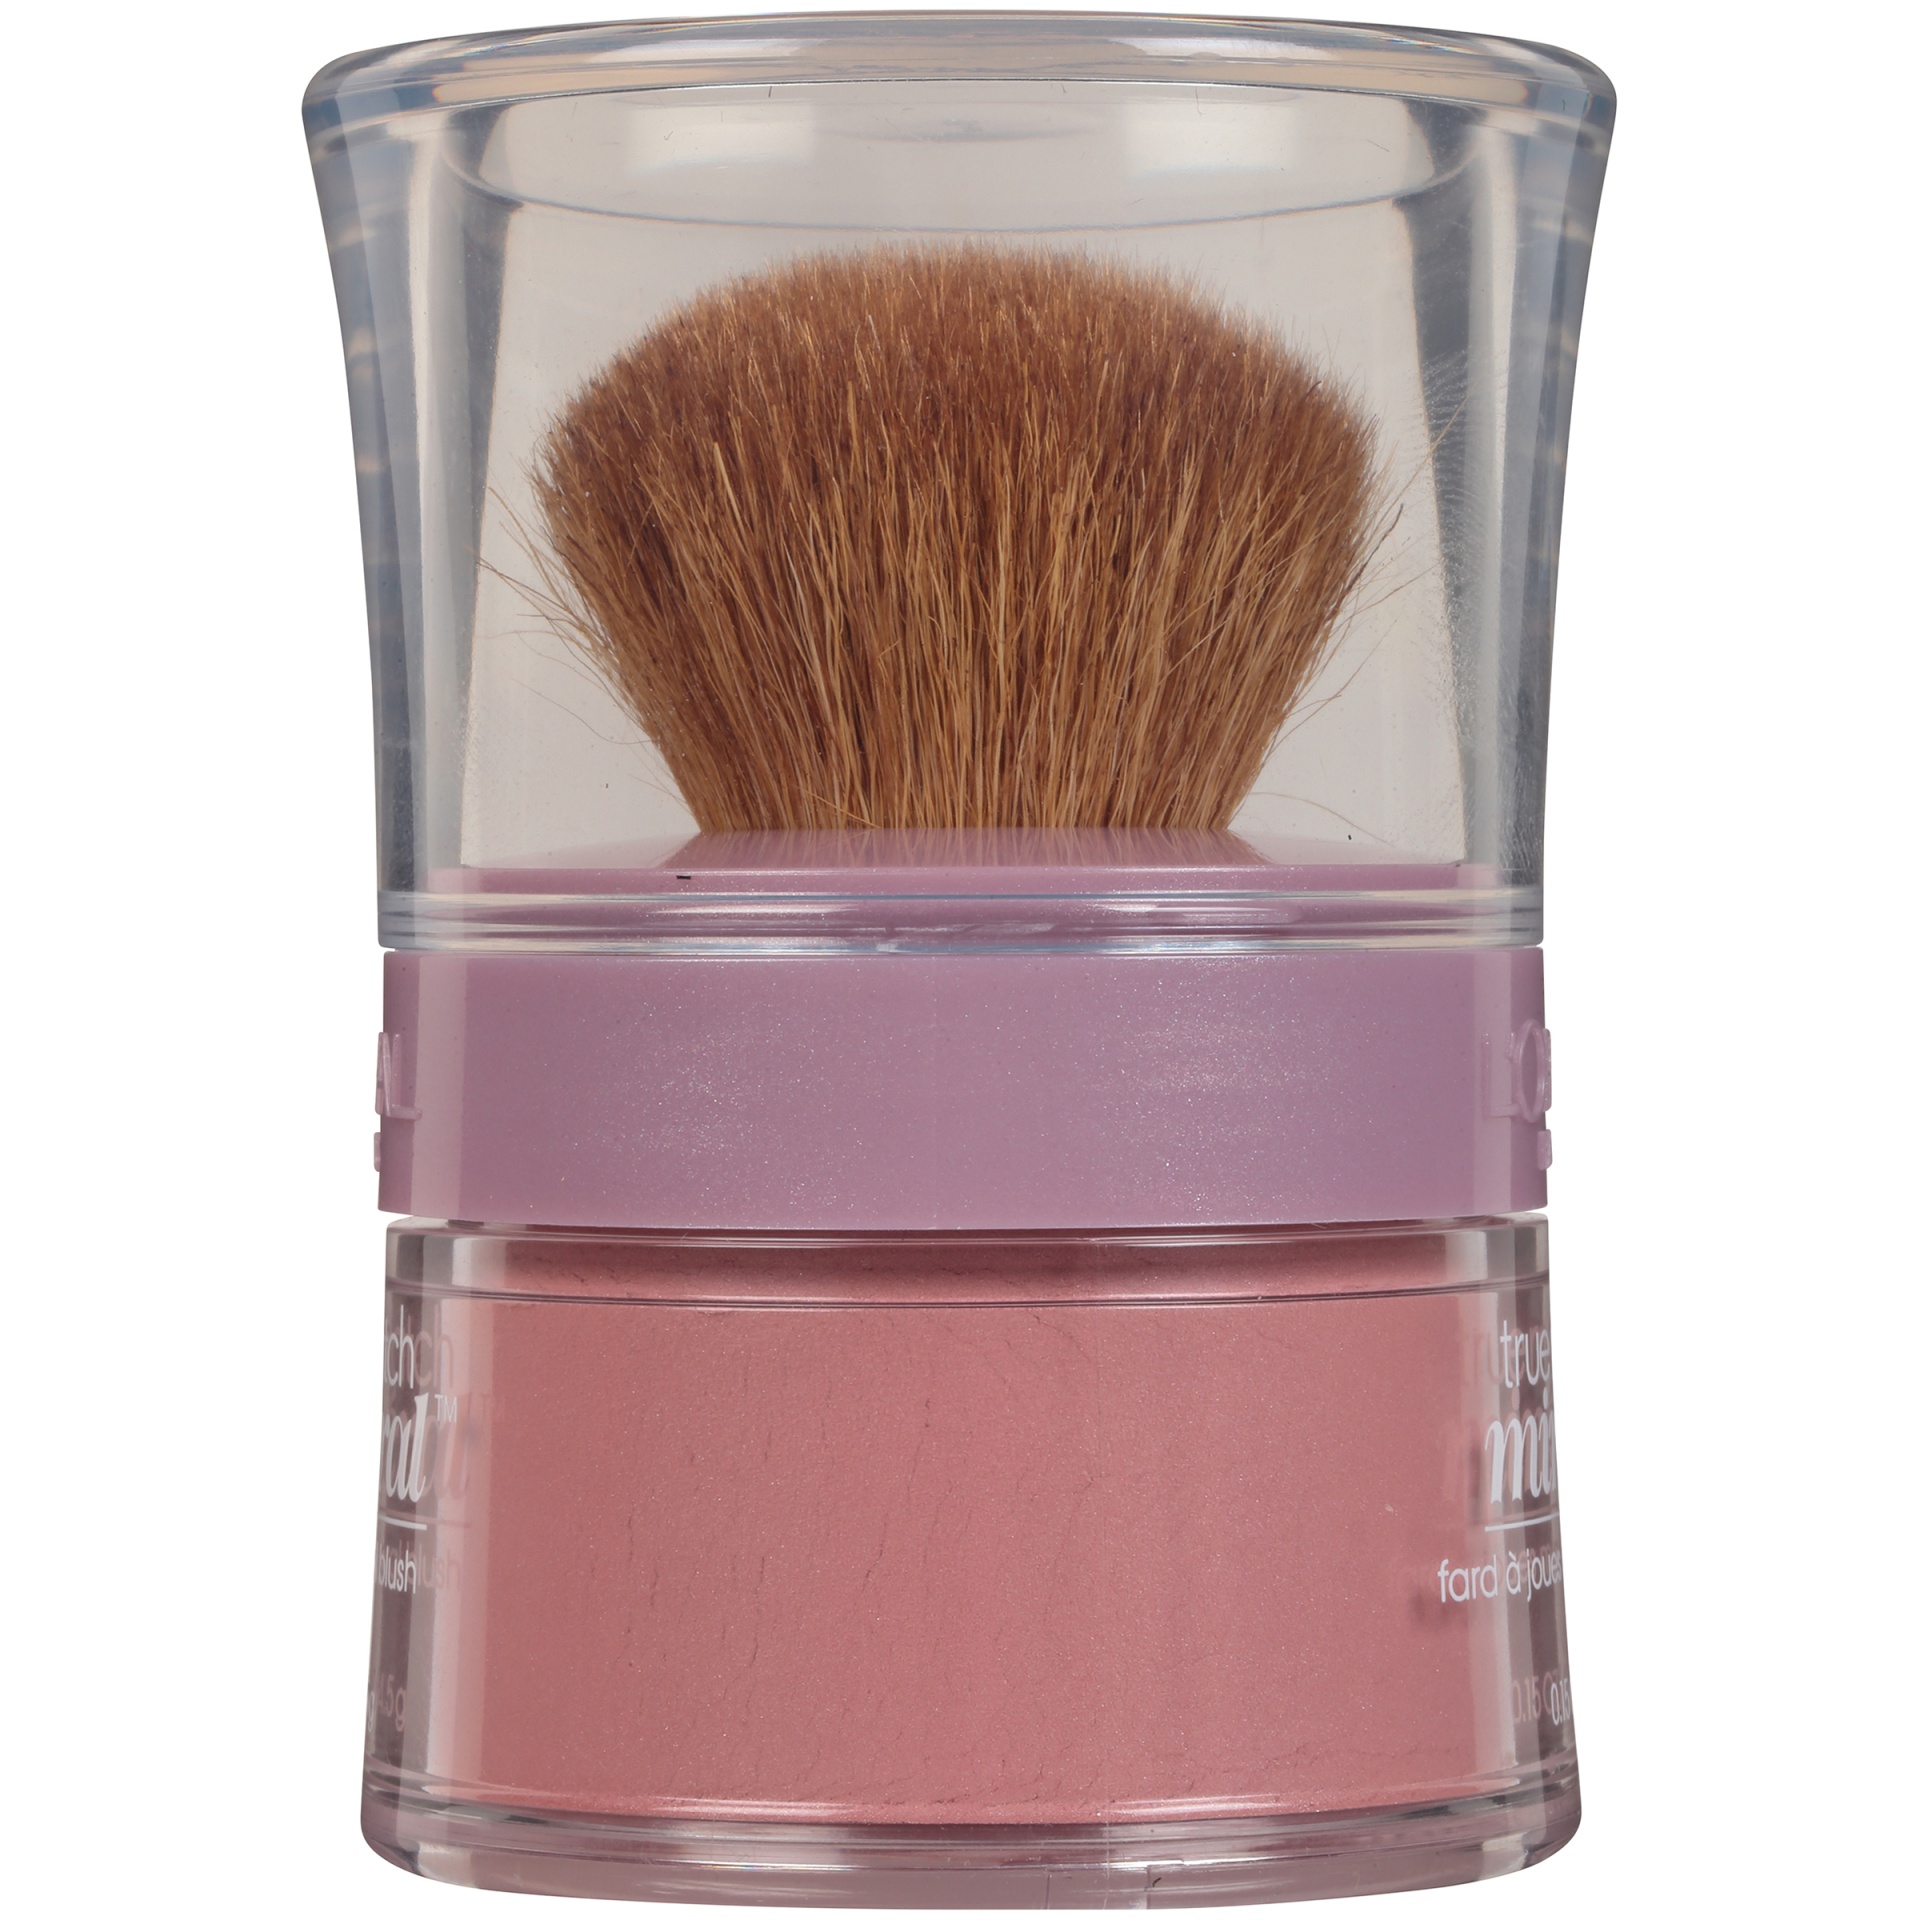 slide 3 of 6, L'Oreal Paris True Match Pinched Pink Mineral Blush, 0.15 oz